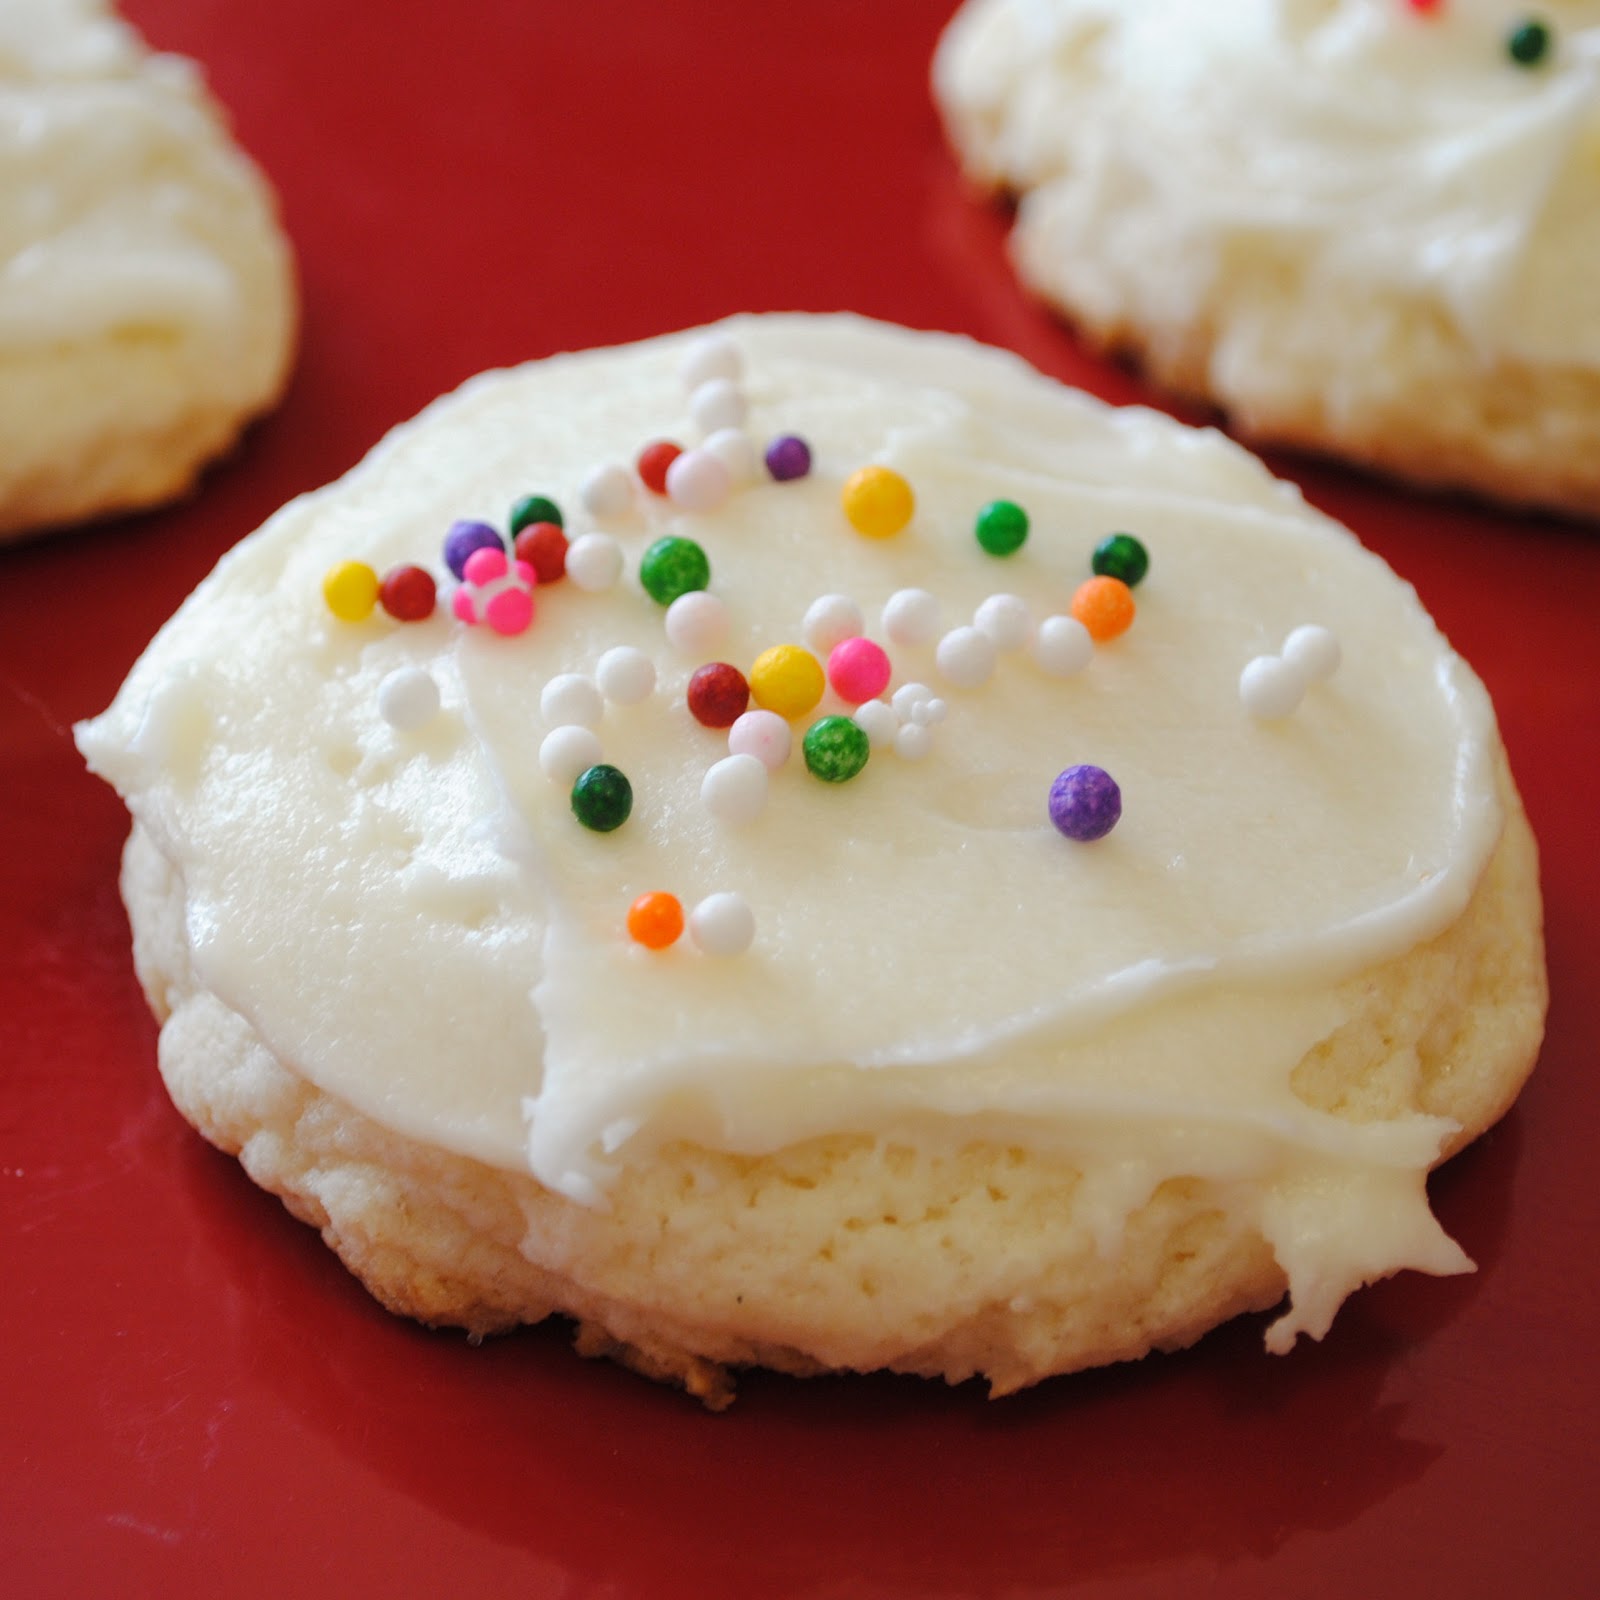 Homemade By Holman: Soft and Thick Sugar Cookies